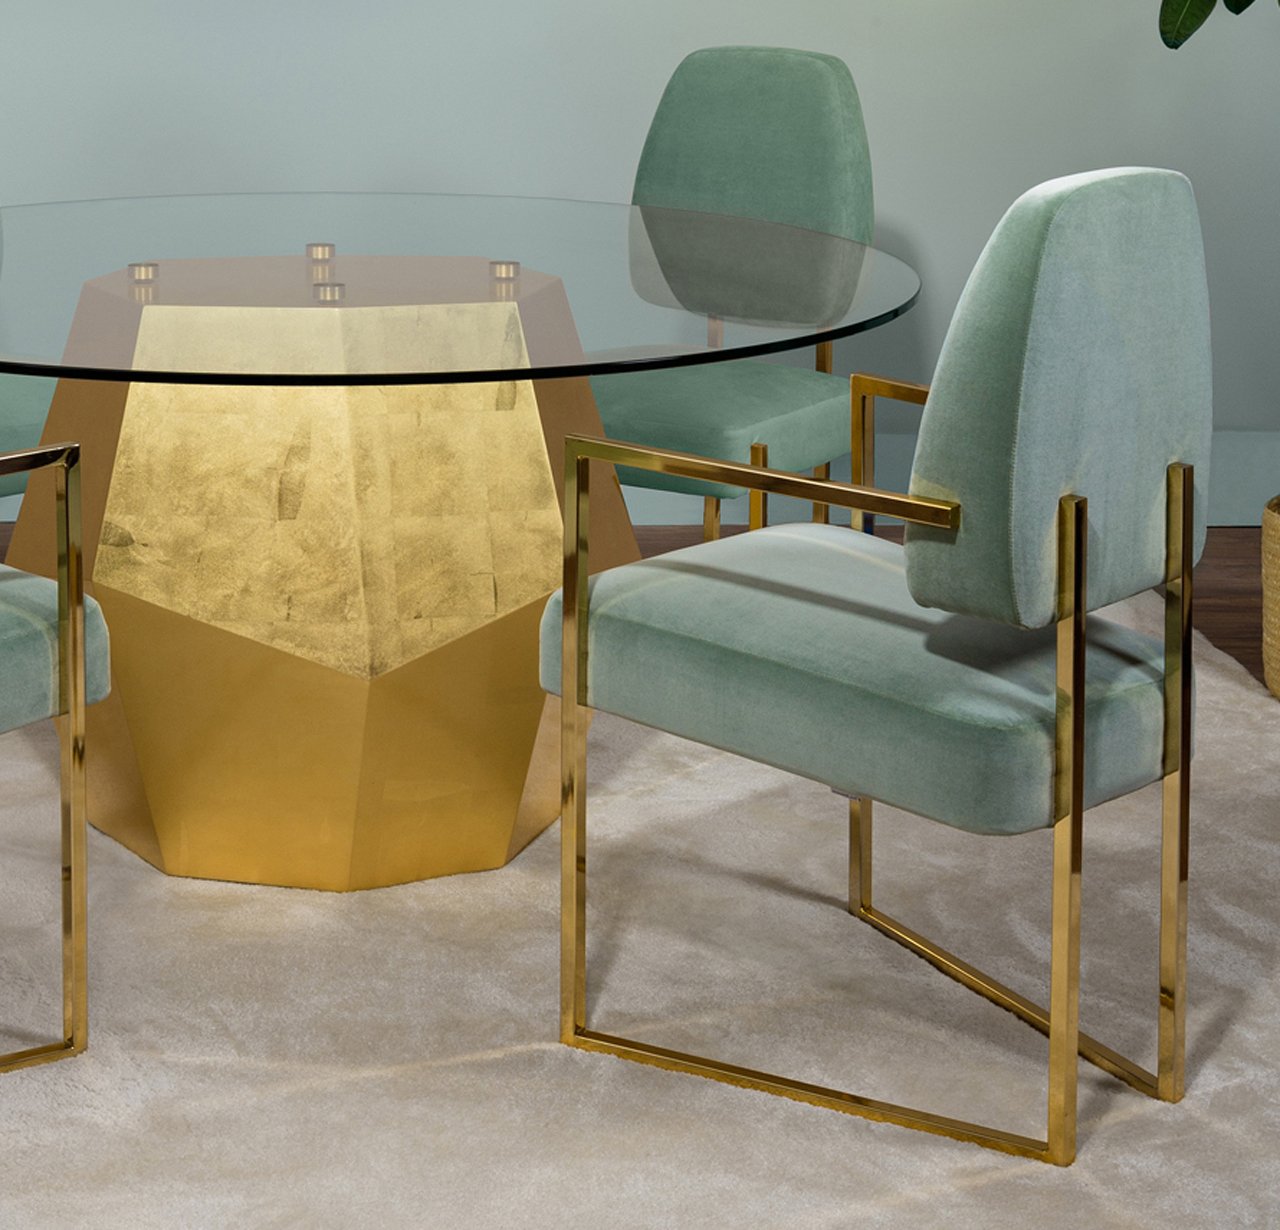 Rock dining table InsidherLand gold leaf unique modern contemporary sculptural geometric materiality design furniture home decor dining room